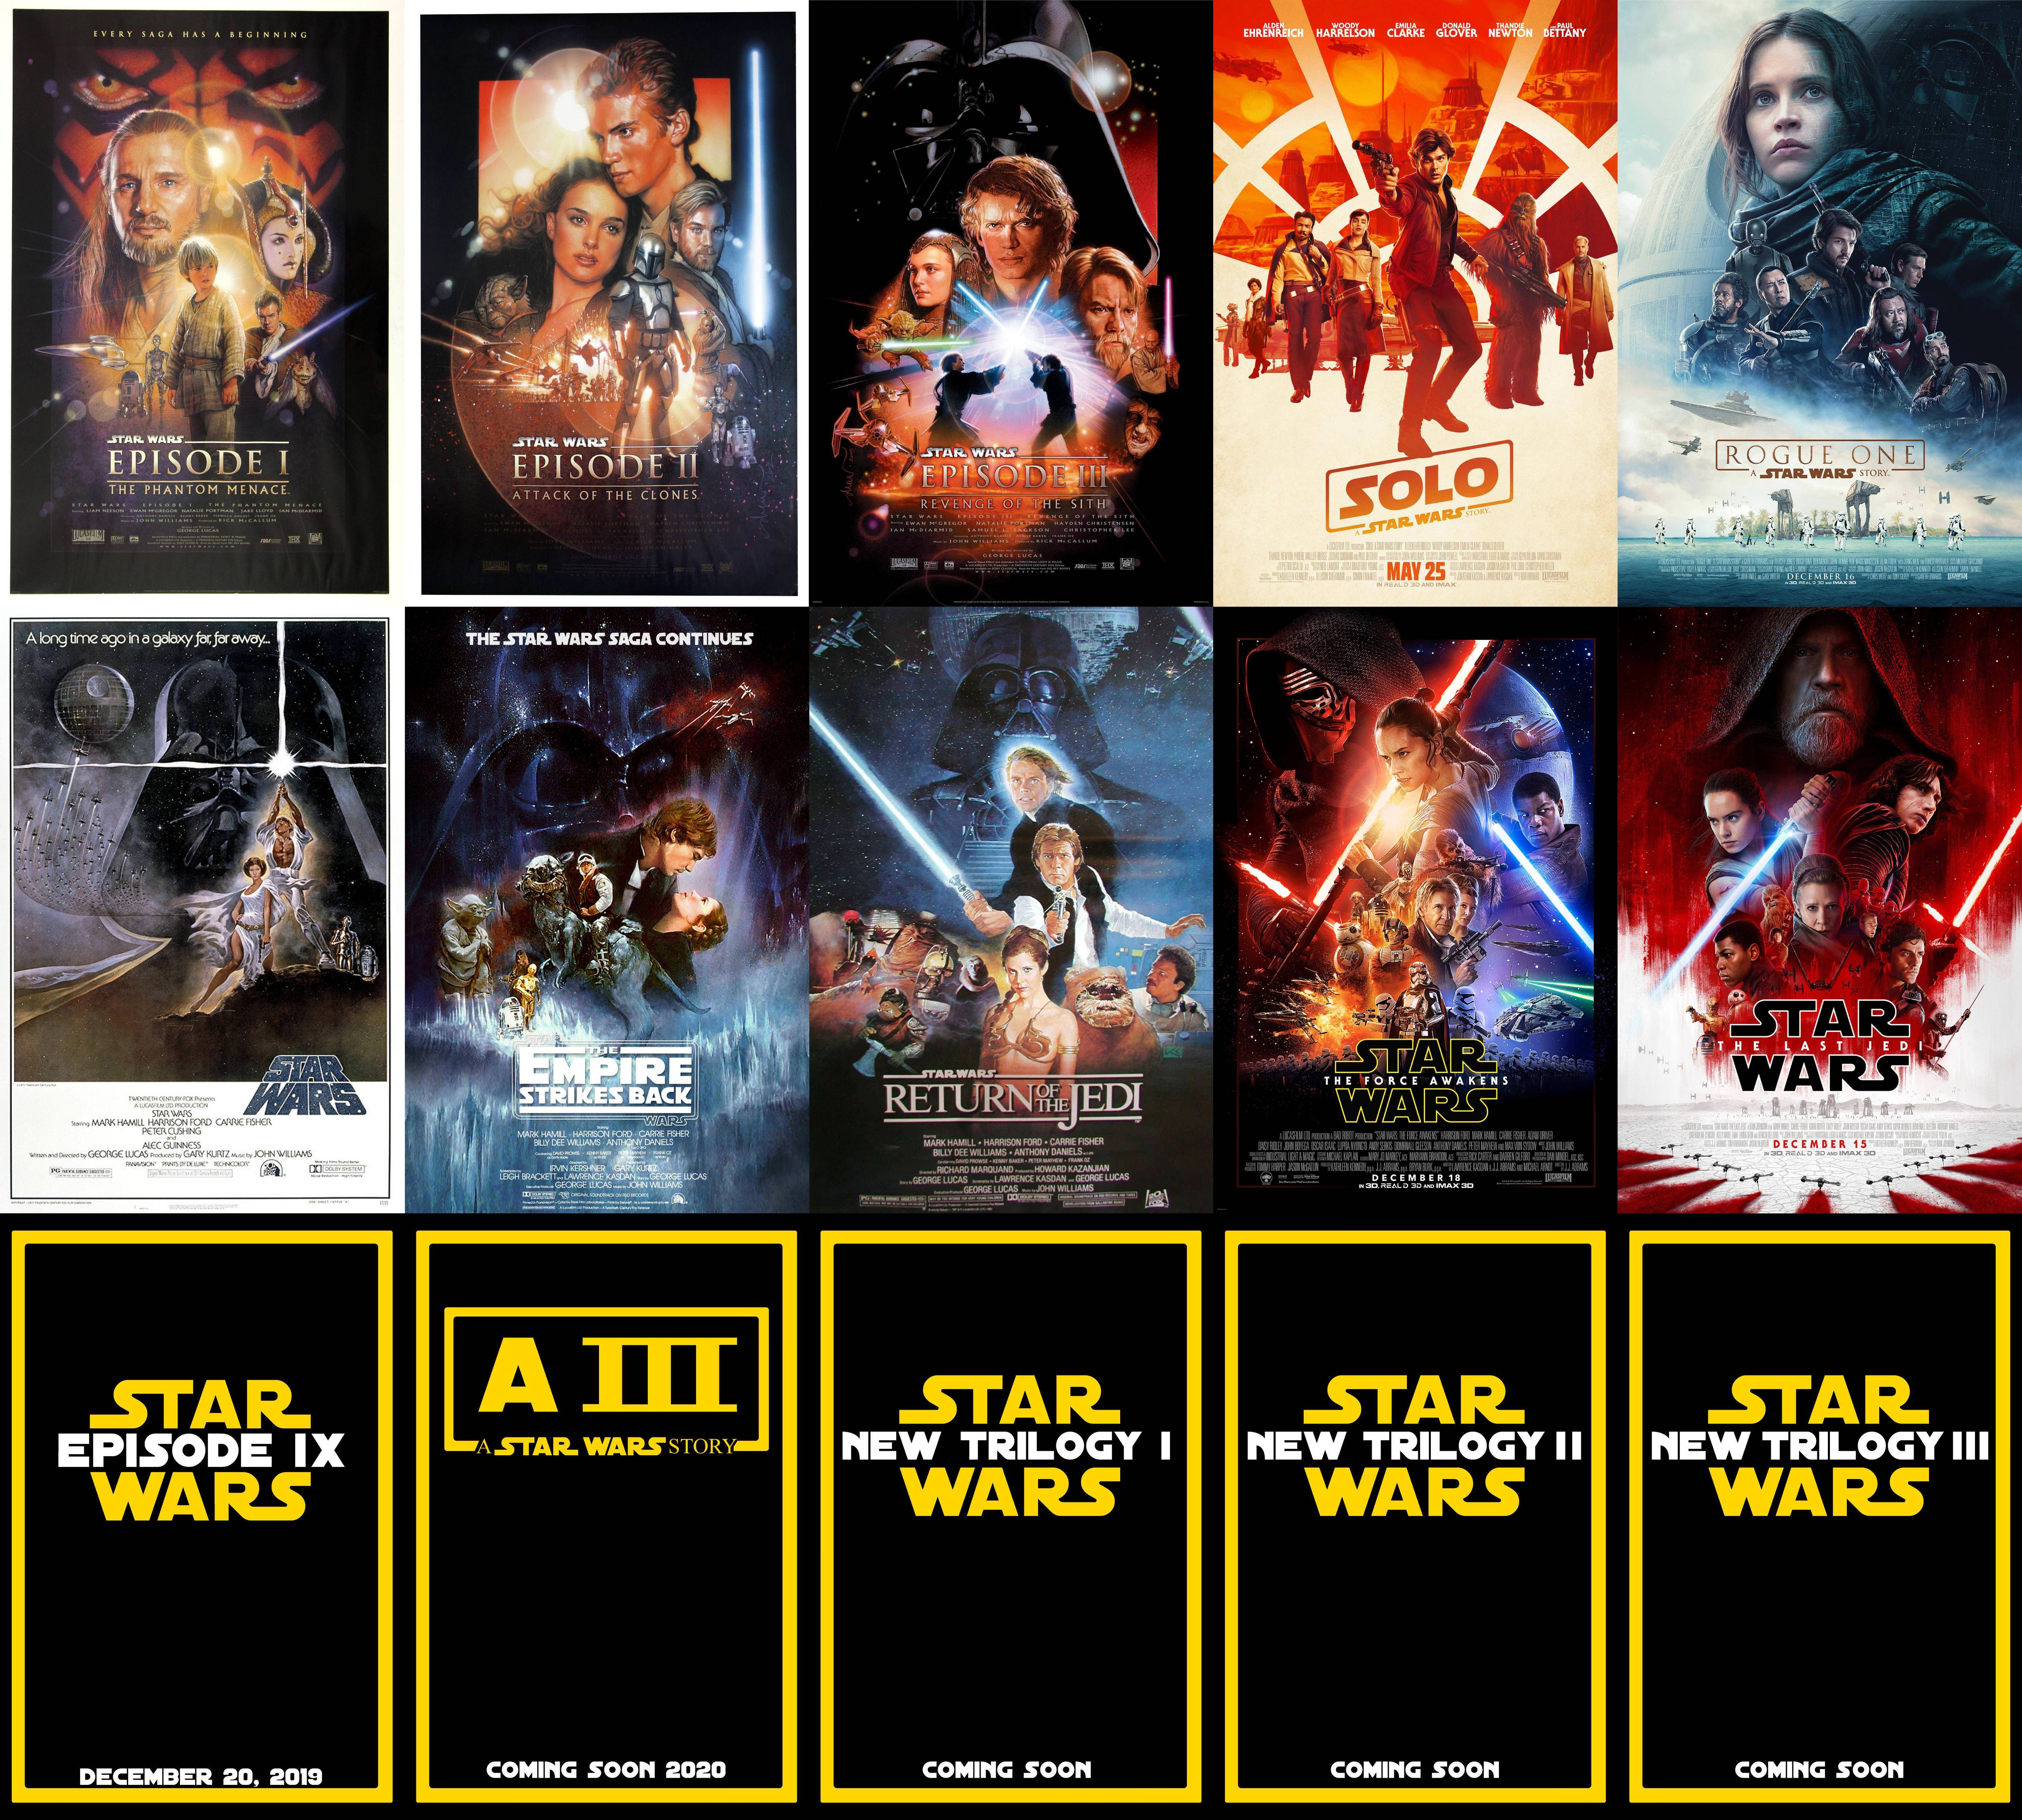 How many trilogies are there in the Star Wars movies?